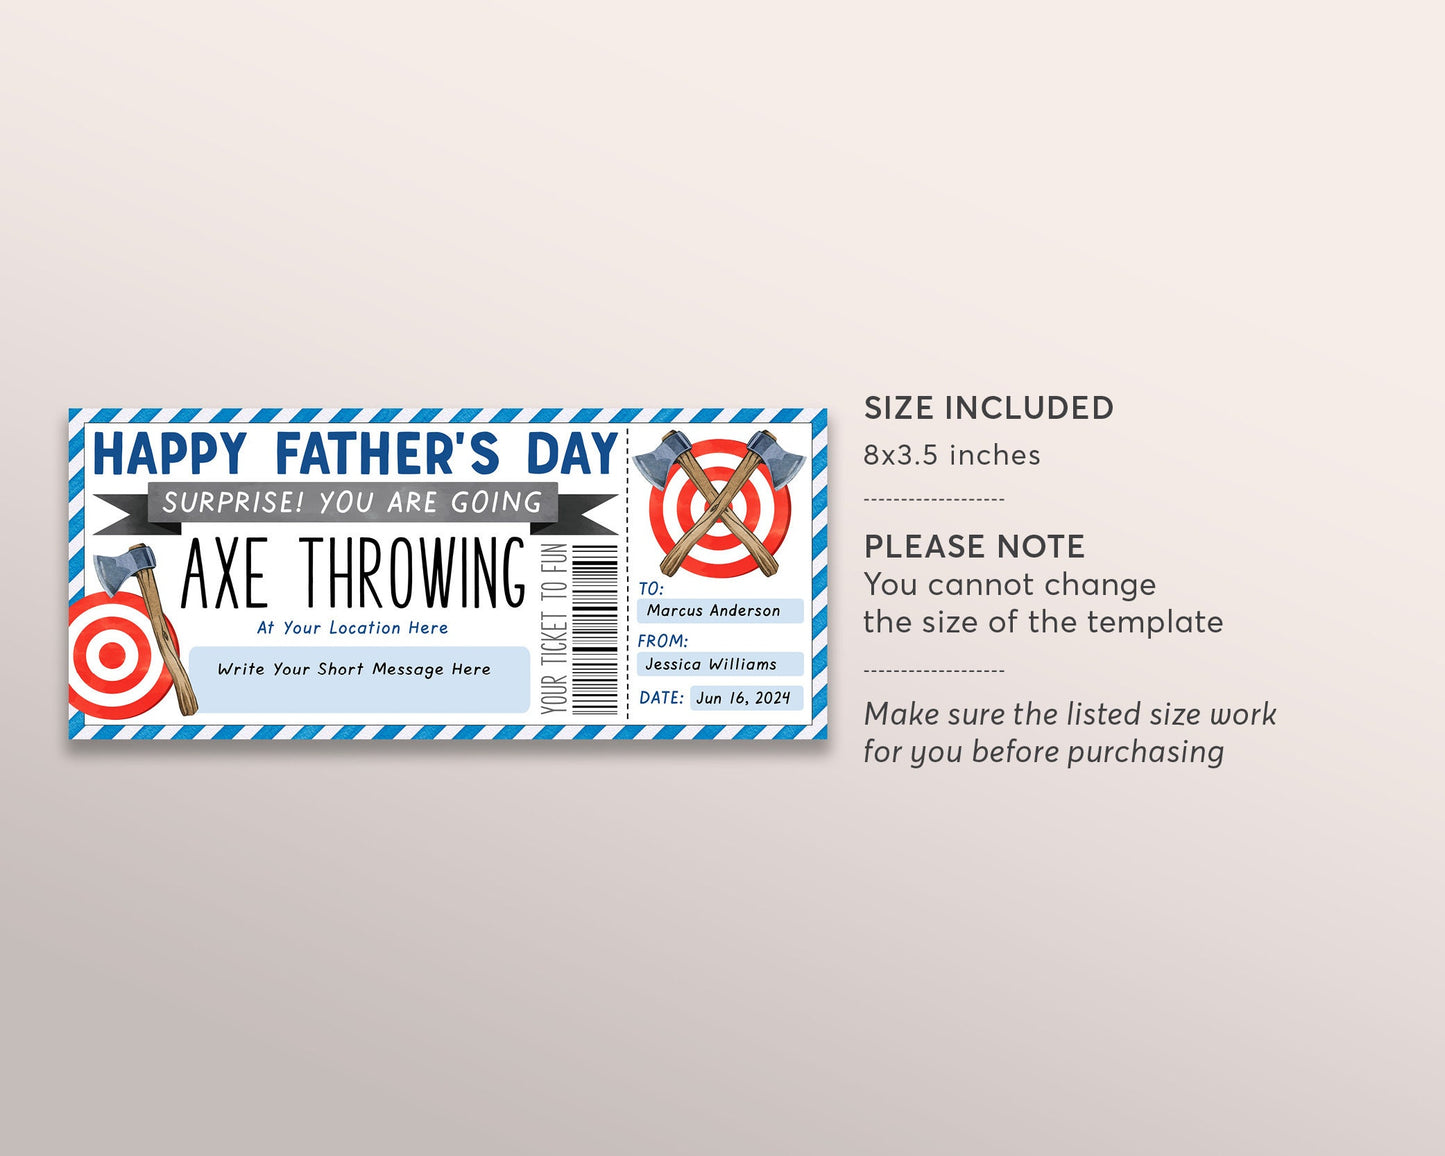 Fathers Day Axe Throwing Gift Certificate Ticket Editable Template, Surprise Hatchet Throwing Experience Gift Voucher Holiday Coupon For Dad